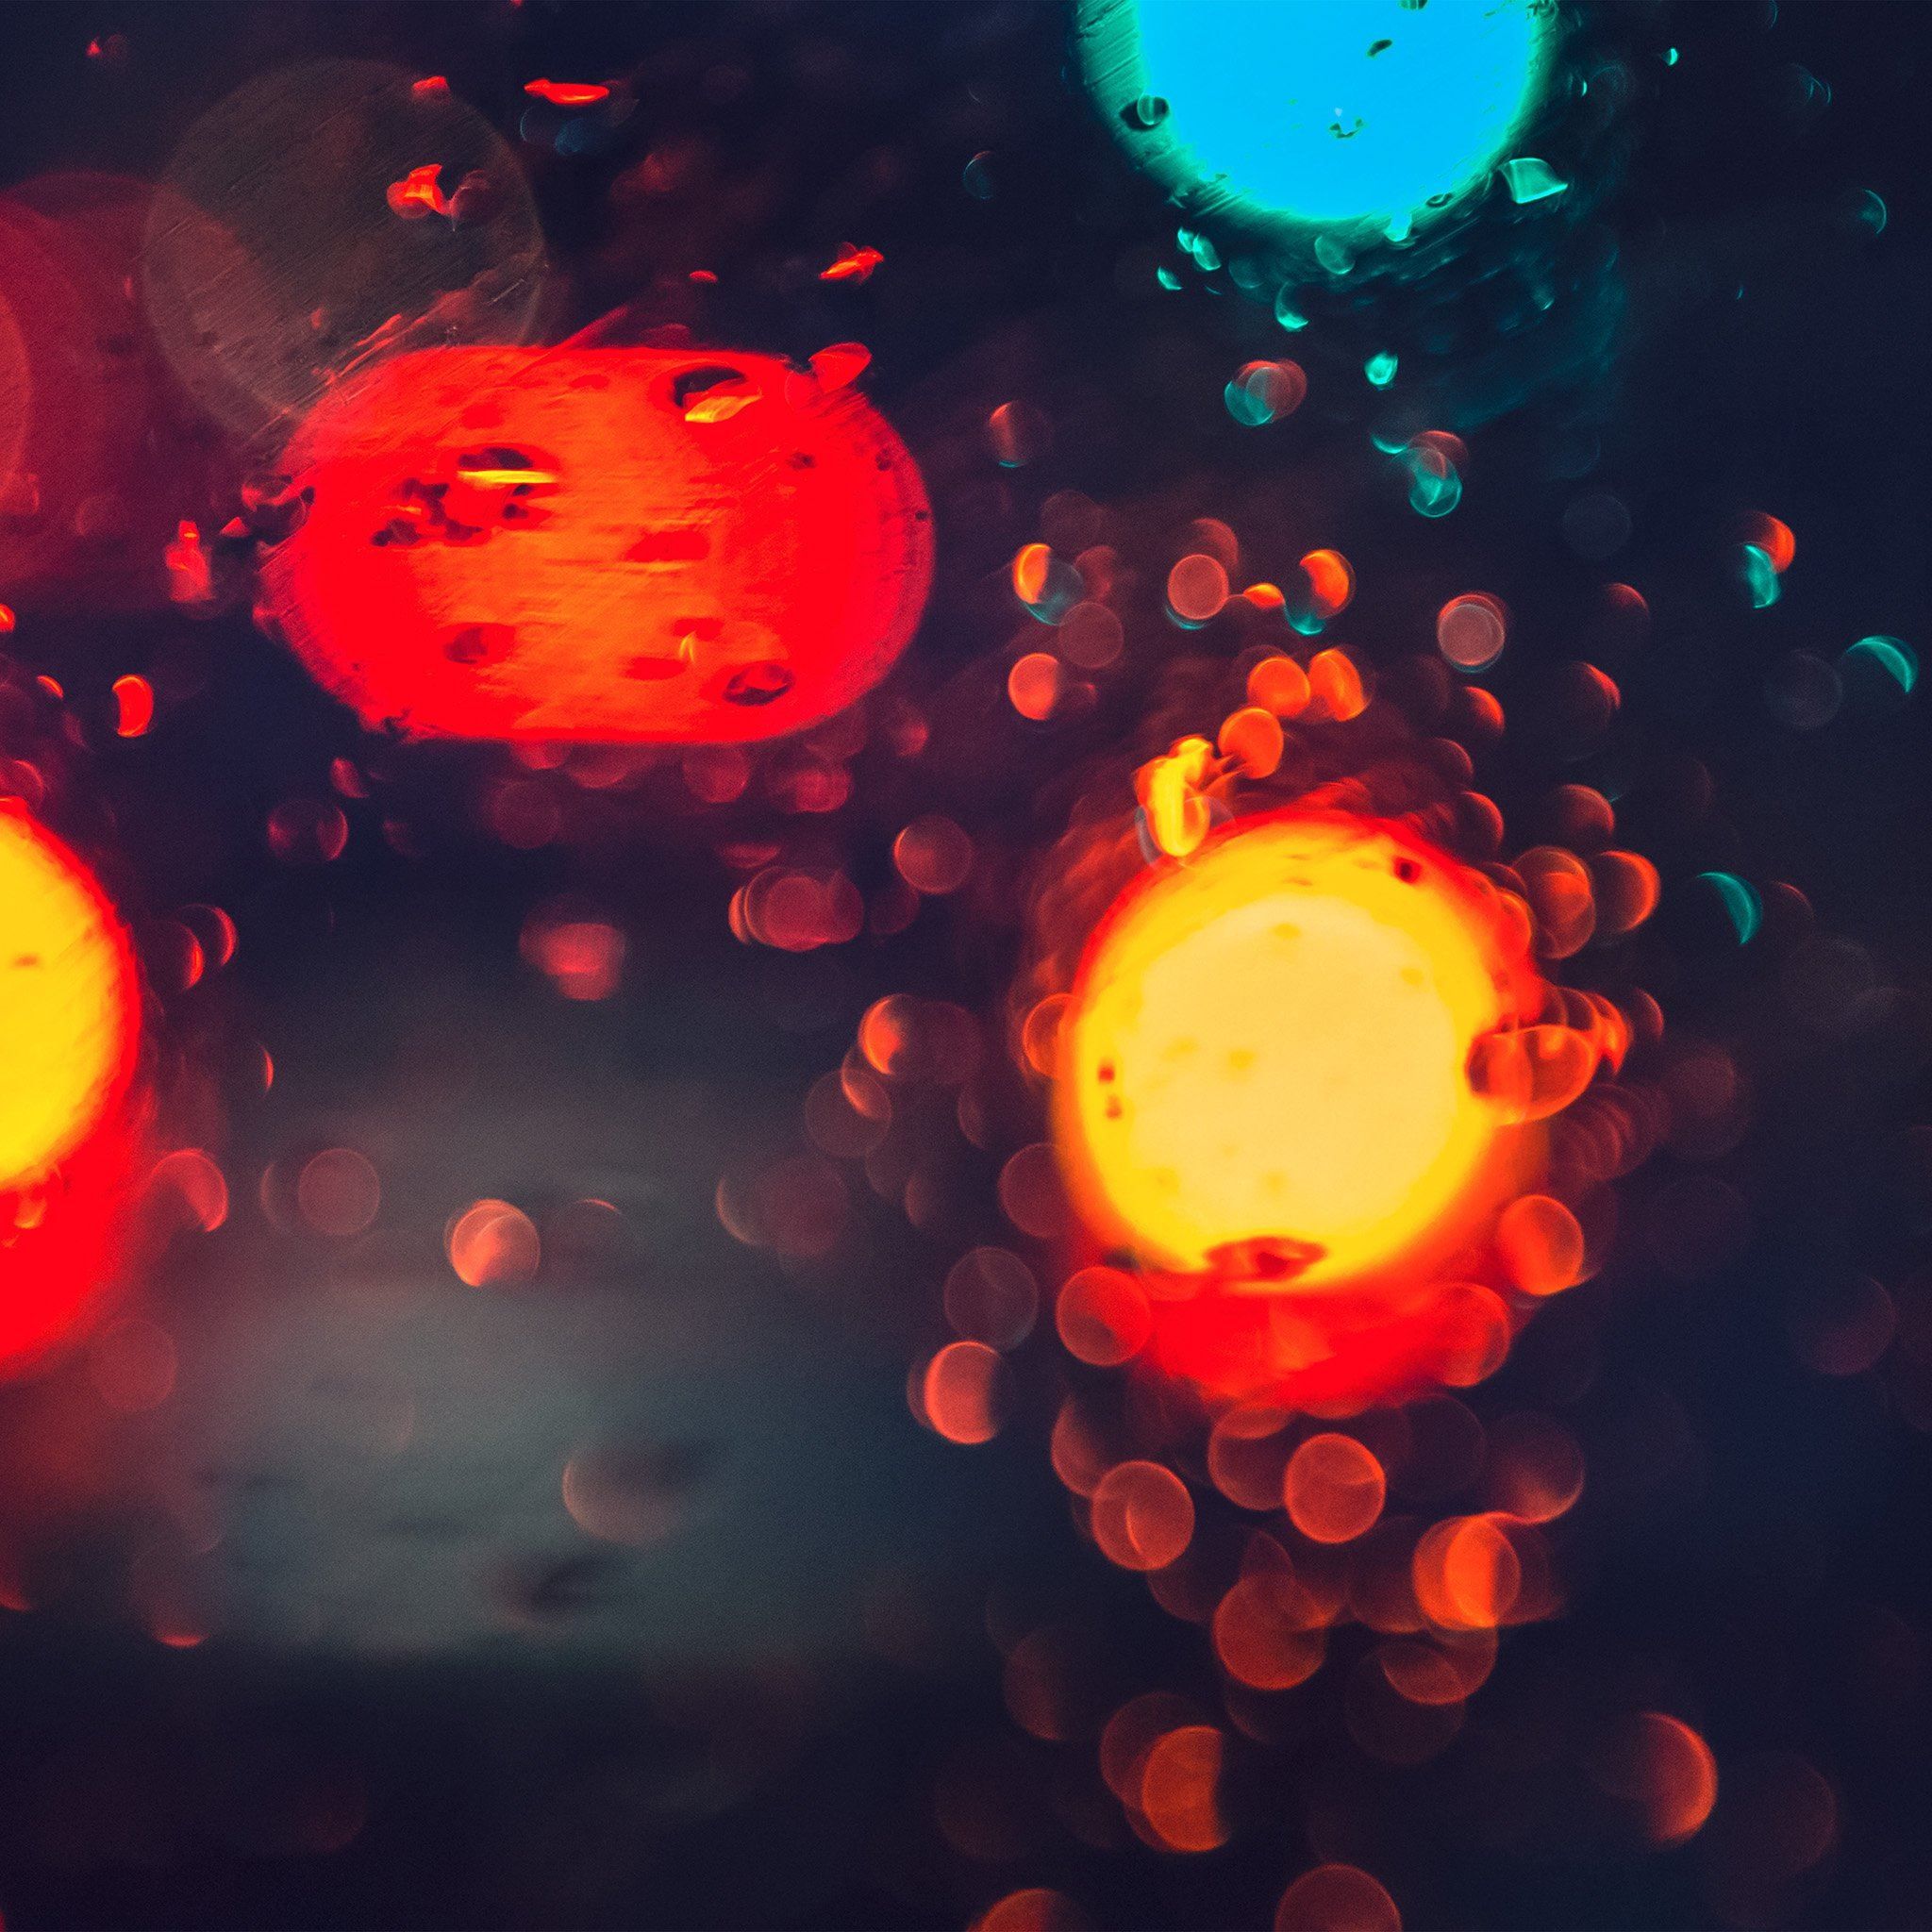 A photo of a rain-soaked window with blurred lights on the other side. - Dark orange